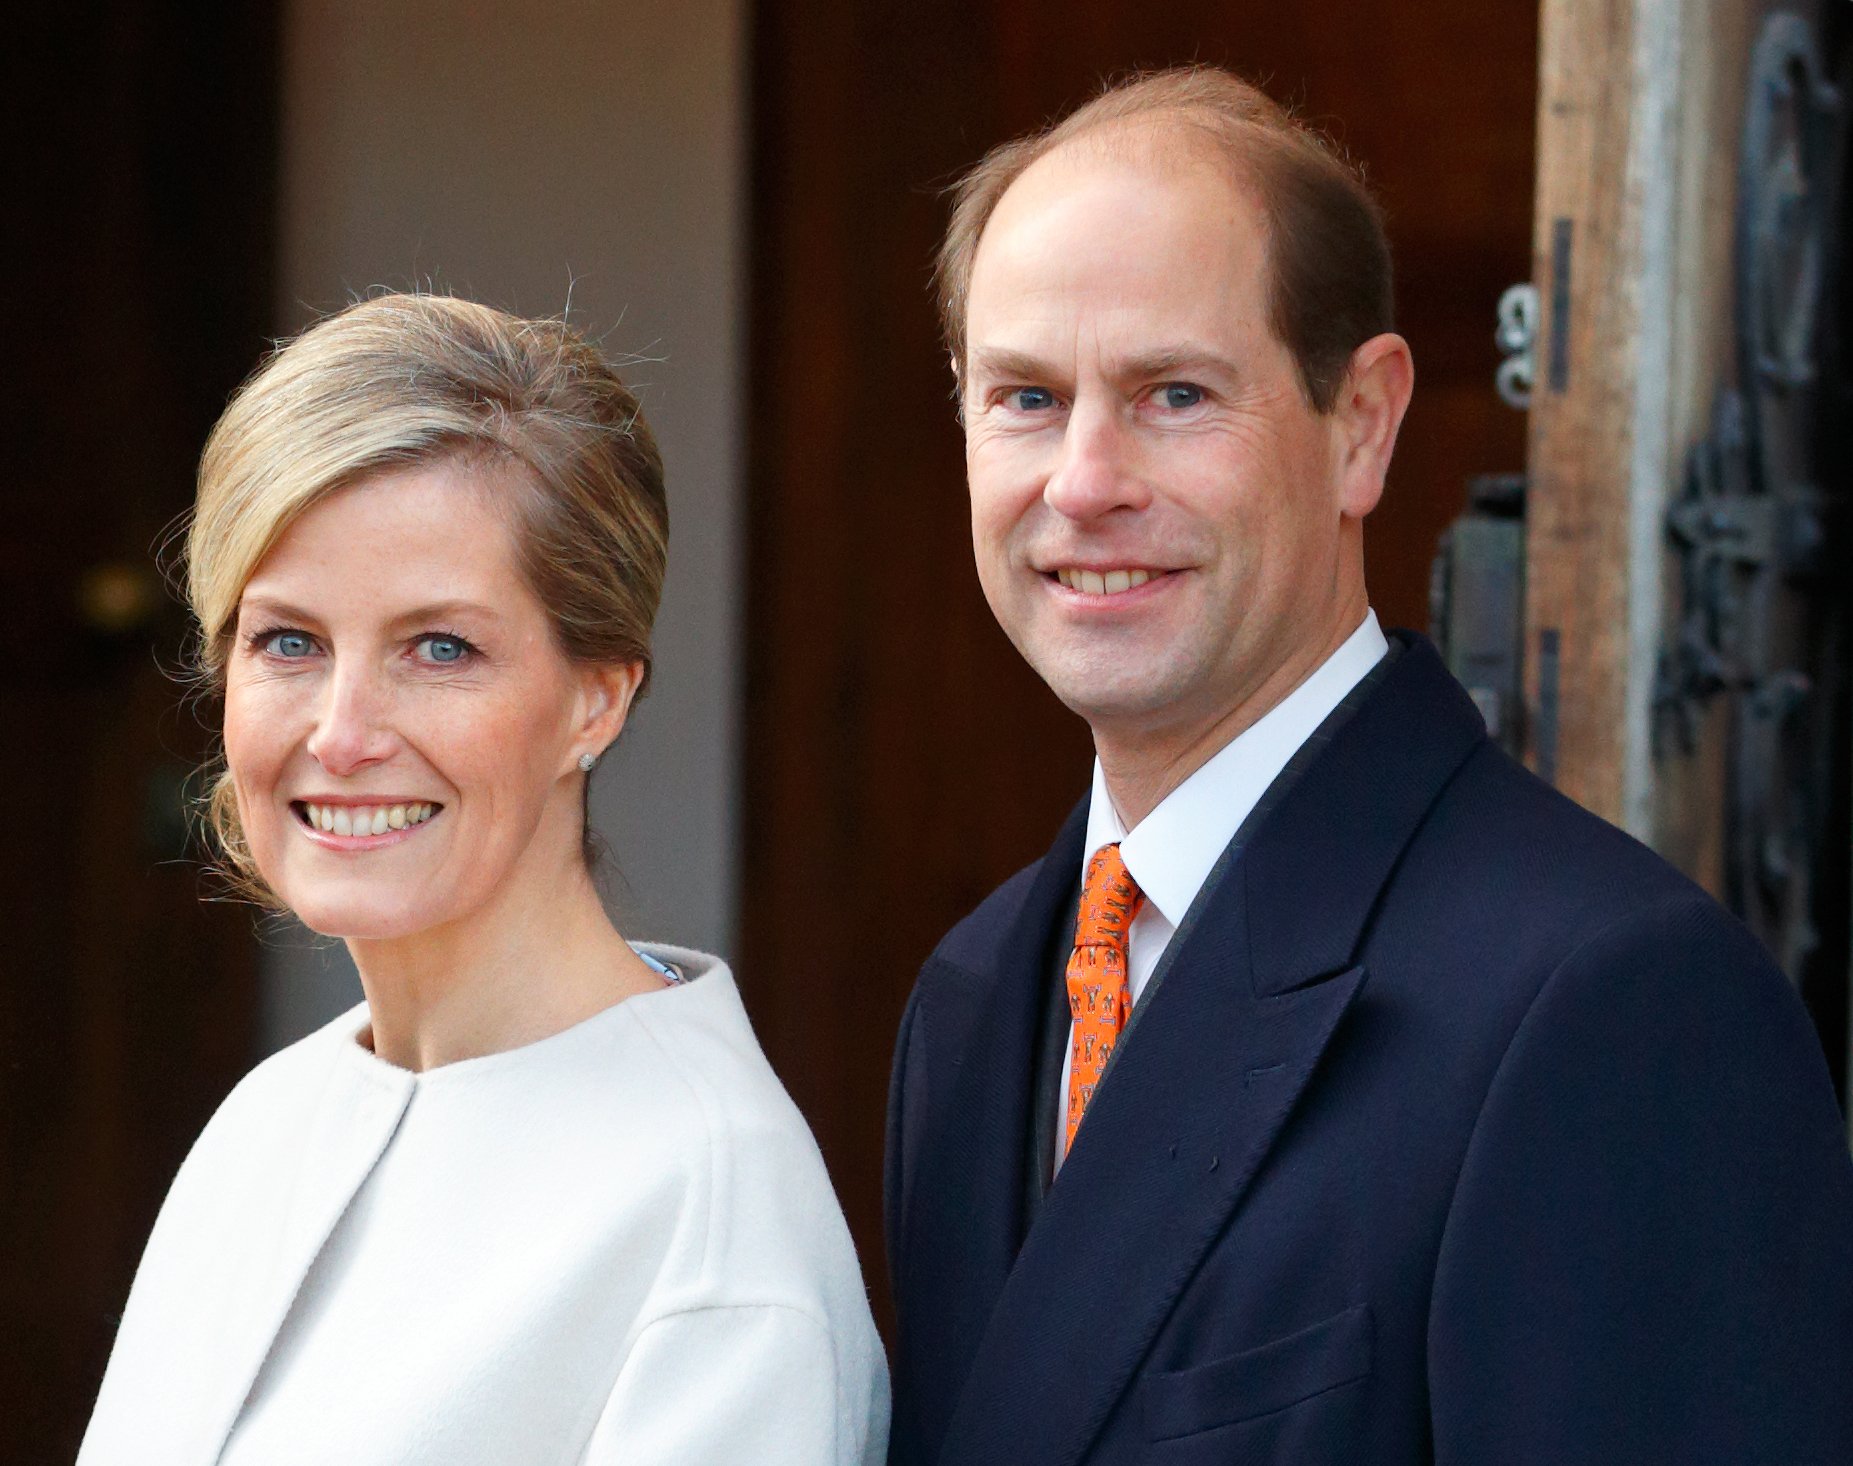  Sophie, Countess of Wessex and Prince Edward, Earl of Wessex visit the Tomorrow's People Social Enterprises at St Anselm's Church, Kennington on the Countess's 50th birthday on January 20, 2015 in London | Source: Getty Images